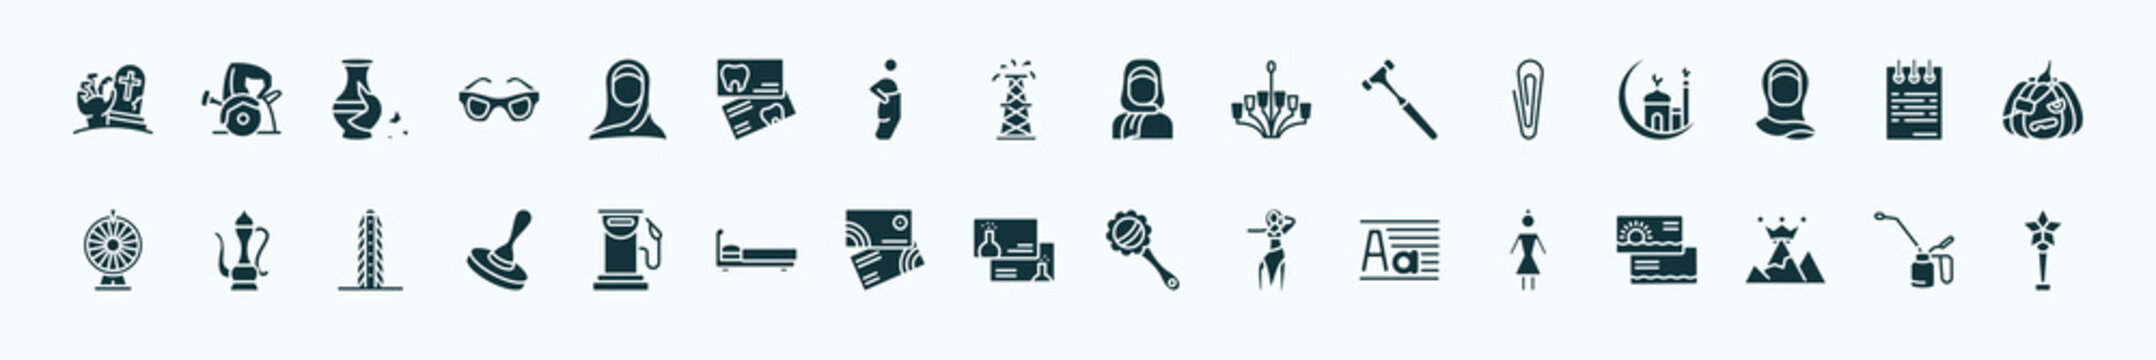 flat filled other icons set. glyph icons such as tombstone zombie hand, araba woman, arab woman with hijab, metal paper clip, notepad sheet, arabic jar, fuel service, chemistry business card,